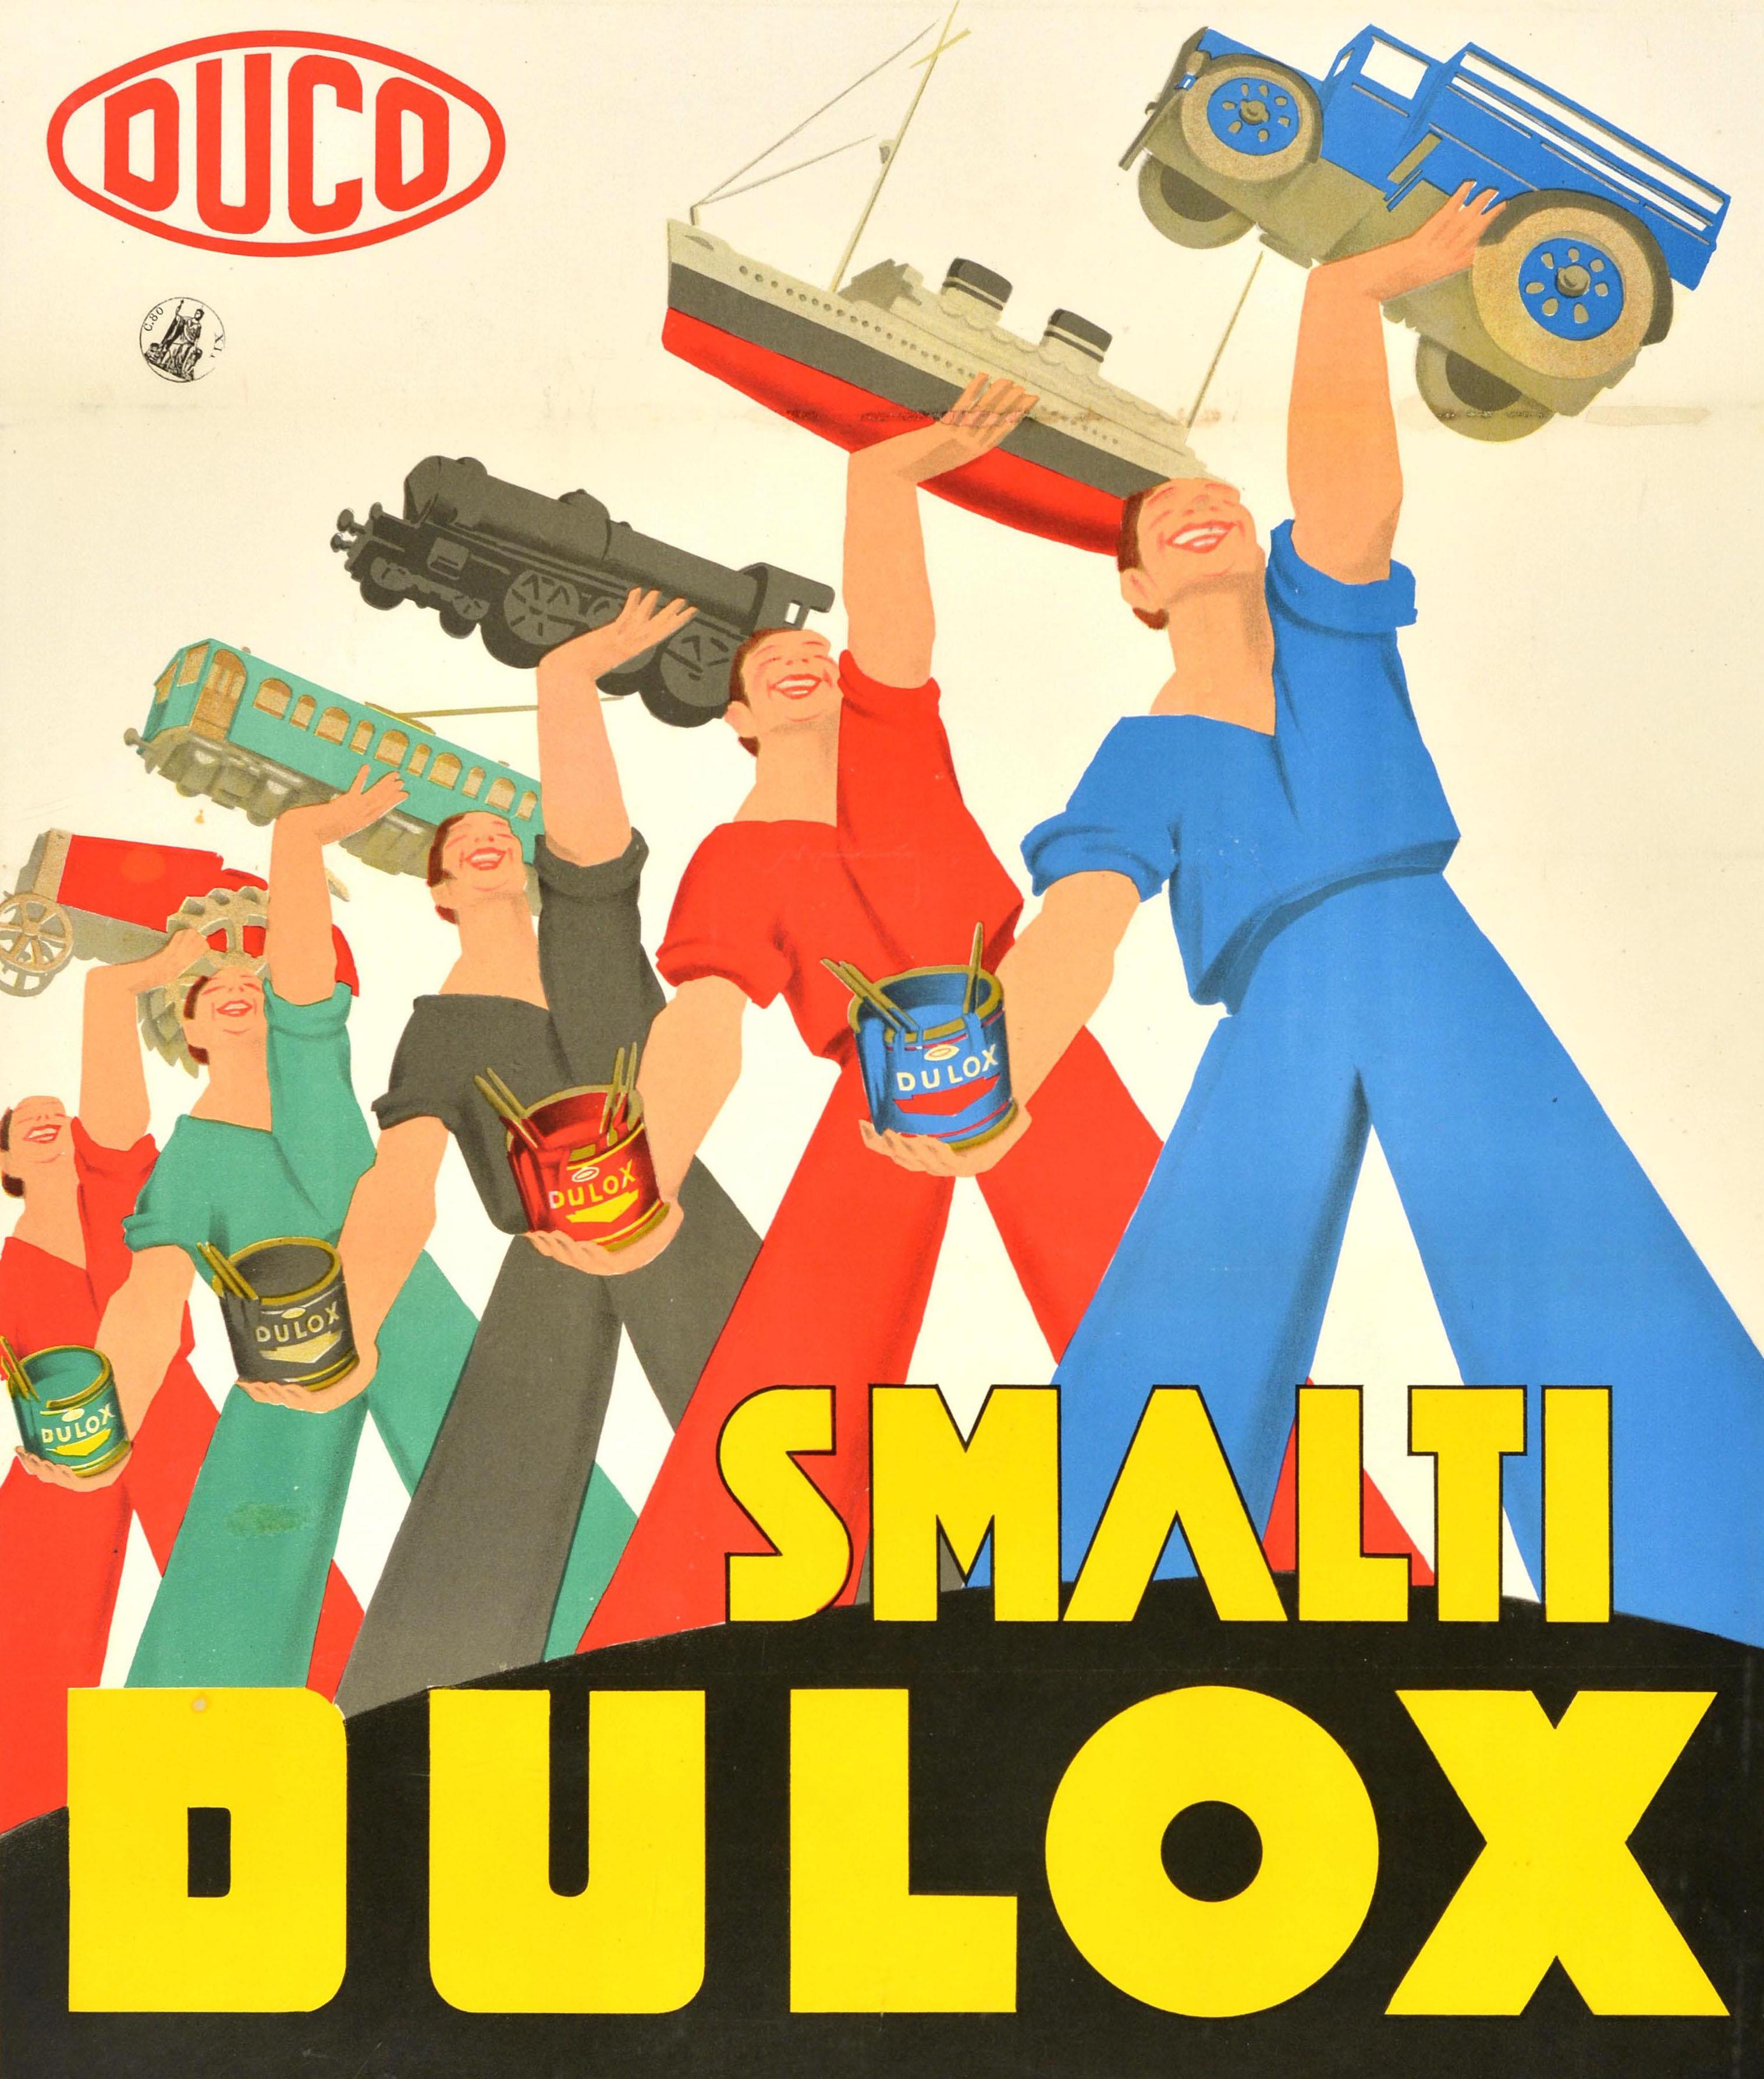 Original Vintage Advertising Poster Duco Dulox Enamel Paint Italy Ducotone - Print by Unknown